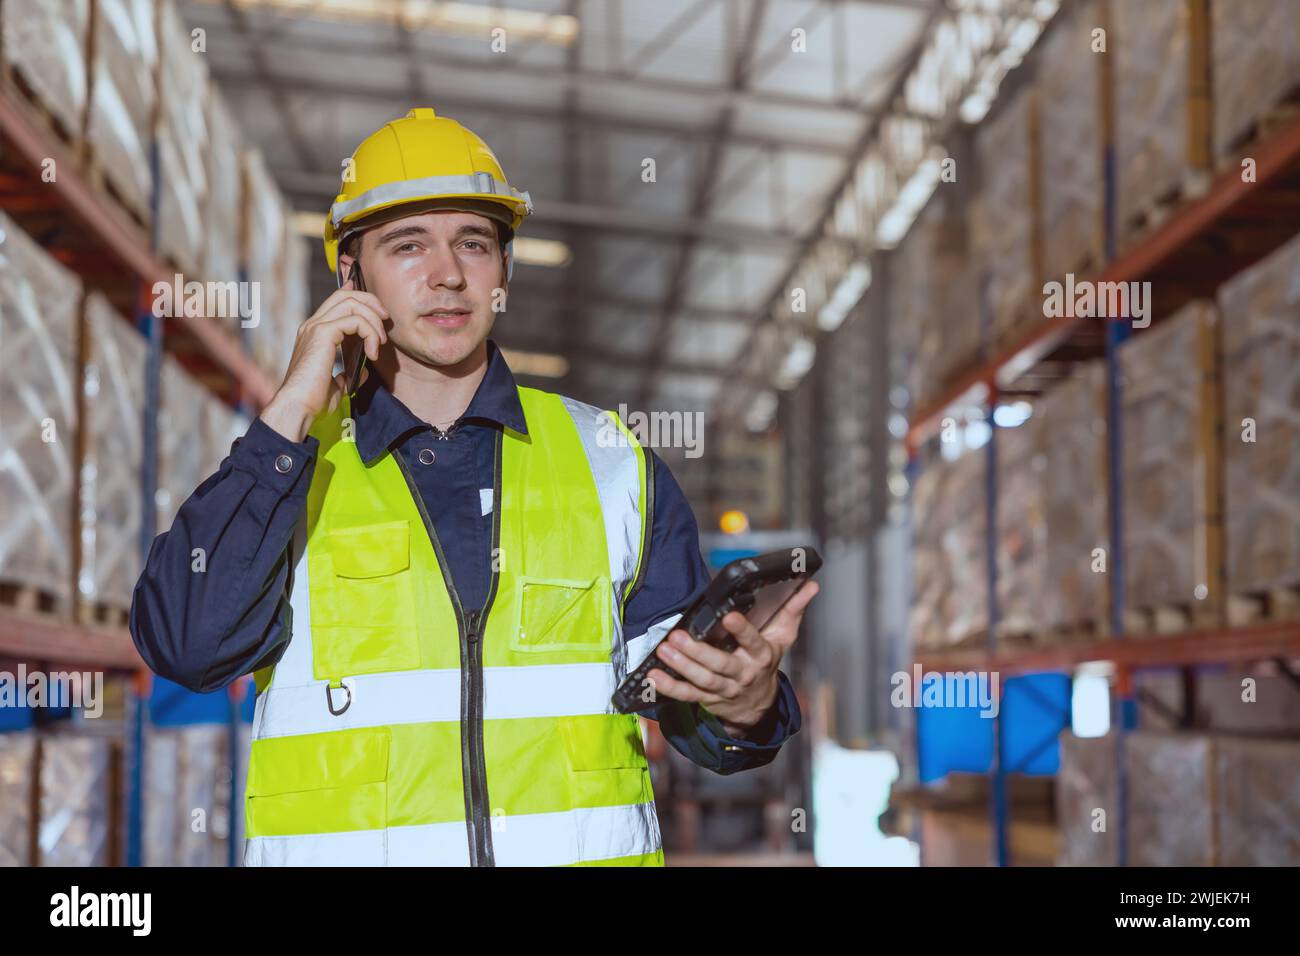 Warehouse worker using smartphone phone calling contact people in factory cargo storage area. Stock Photo